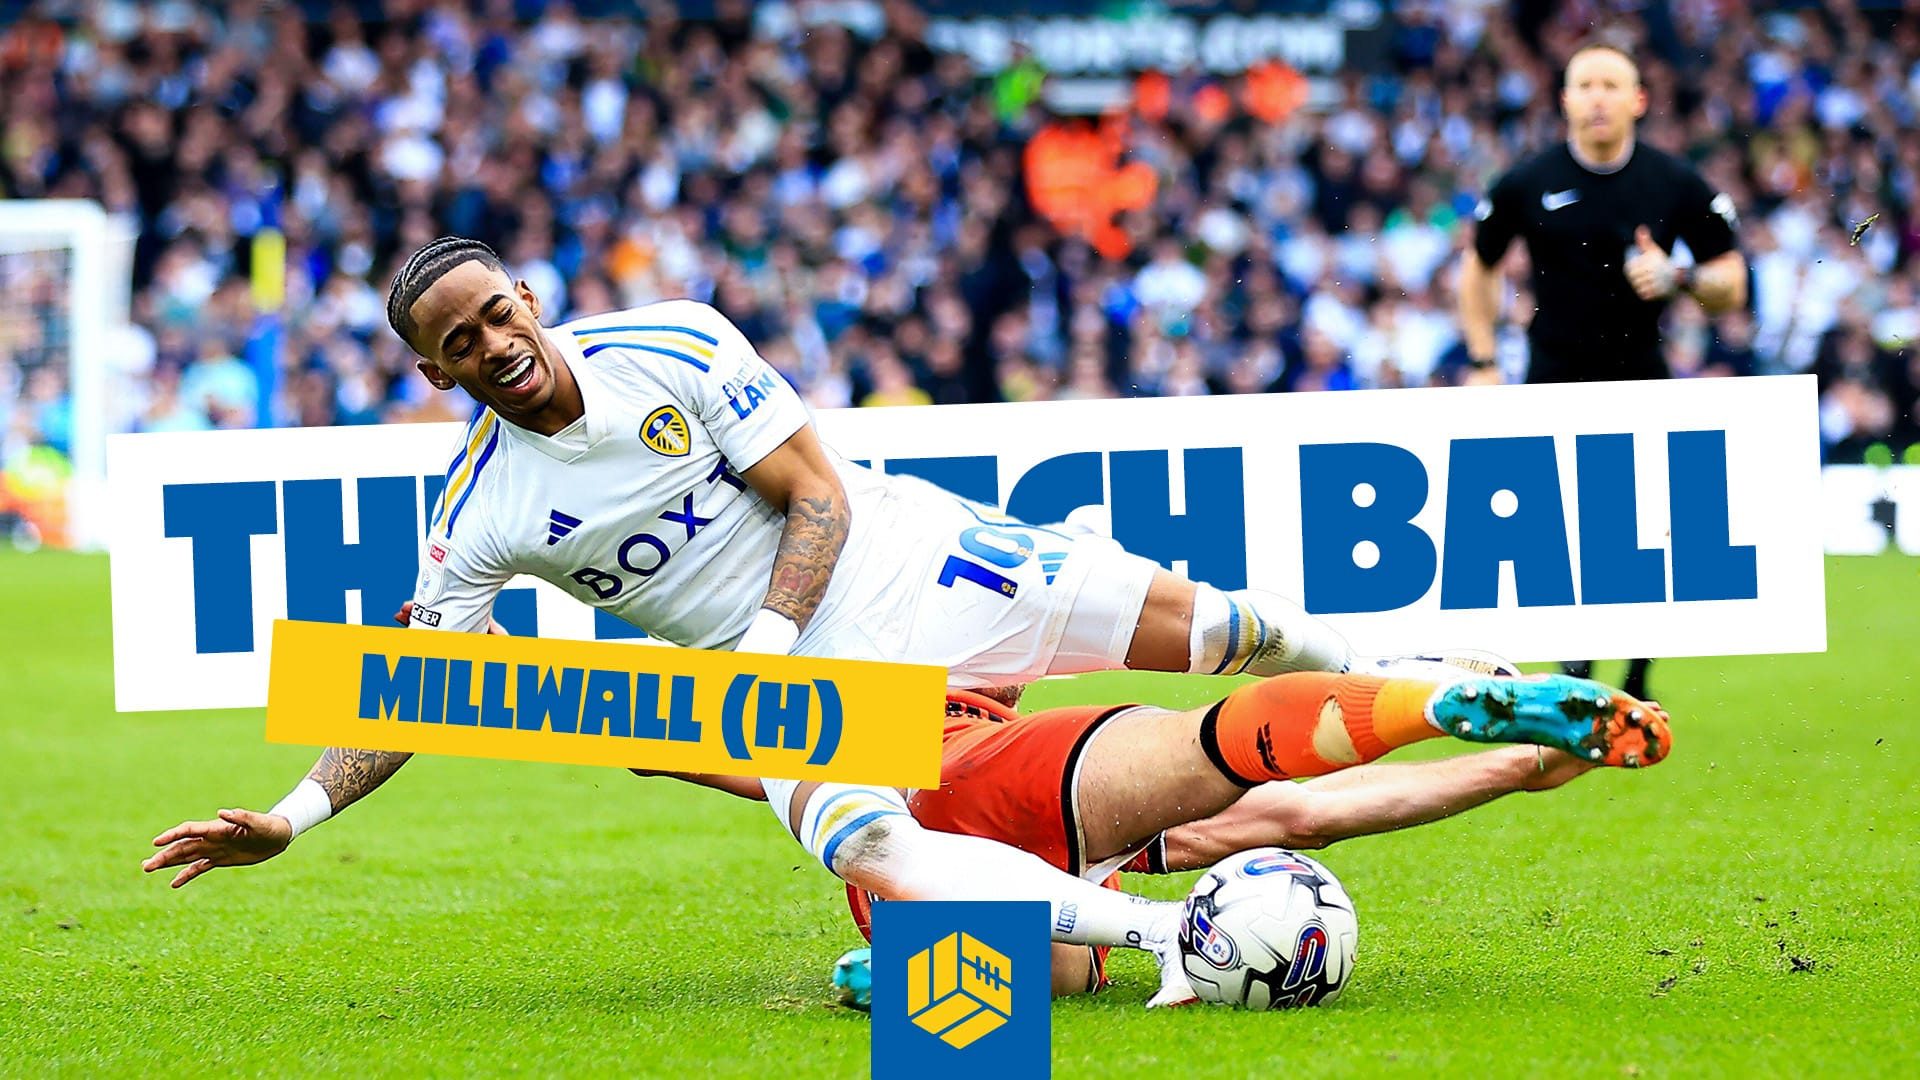 Cardiff City 0-3 Leeds United: Where the time goes • The Square Ball